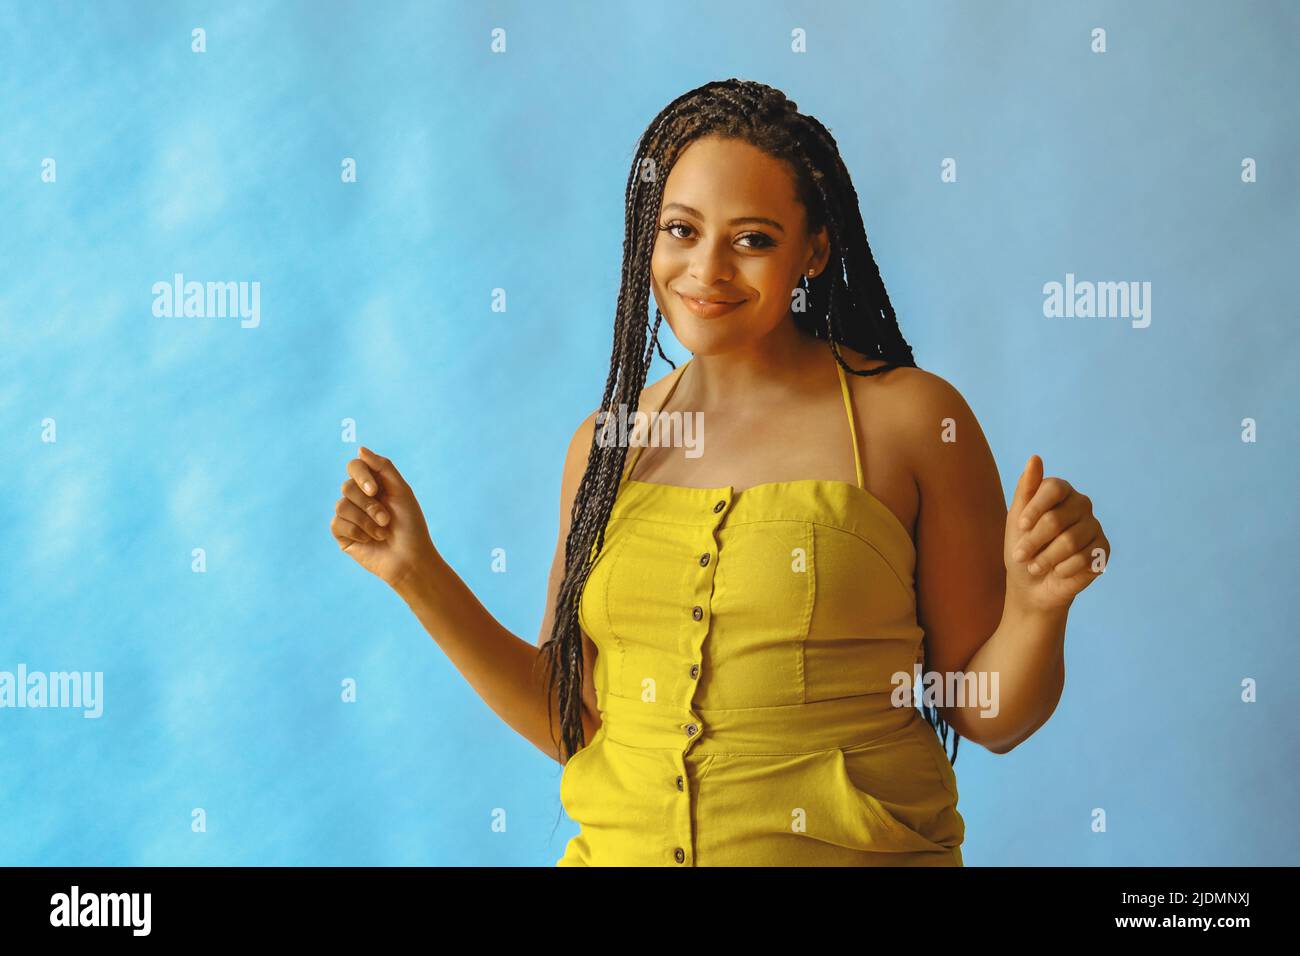 portrait of young adult beautiful african american woman smiling and dancing with braid hair posing at studio shot Stock Photo